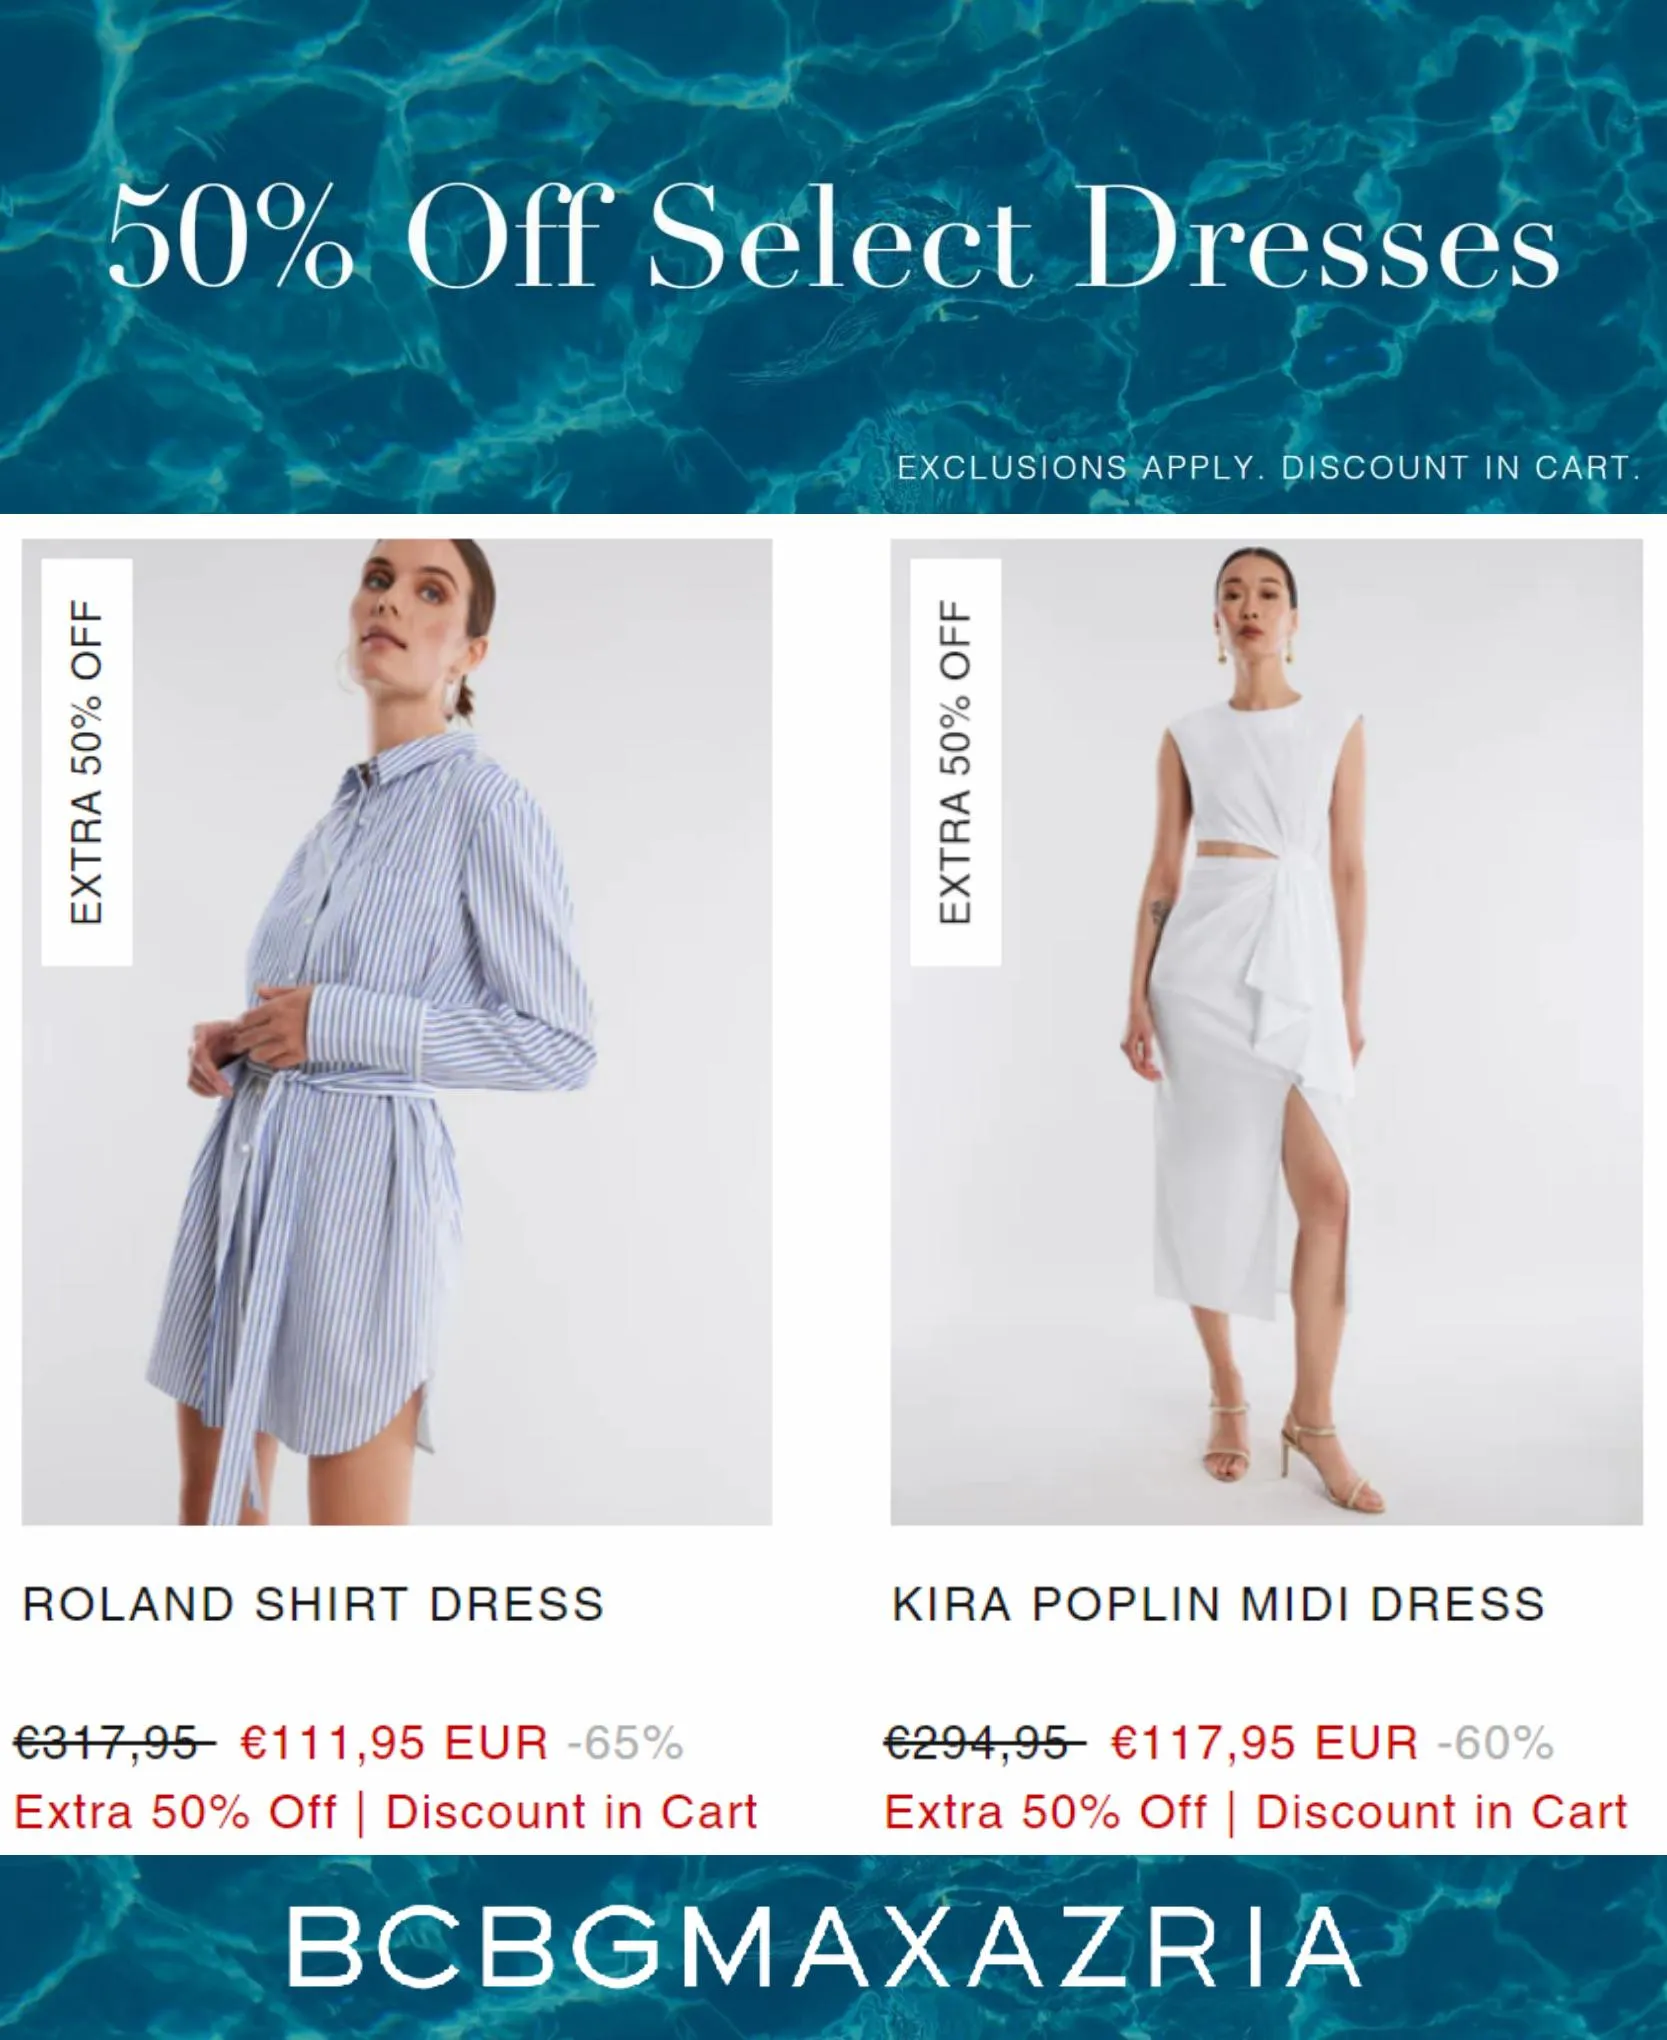 Catalogue 50% Off Select Dresses, page 00009